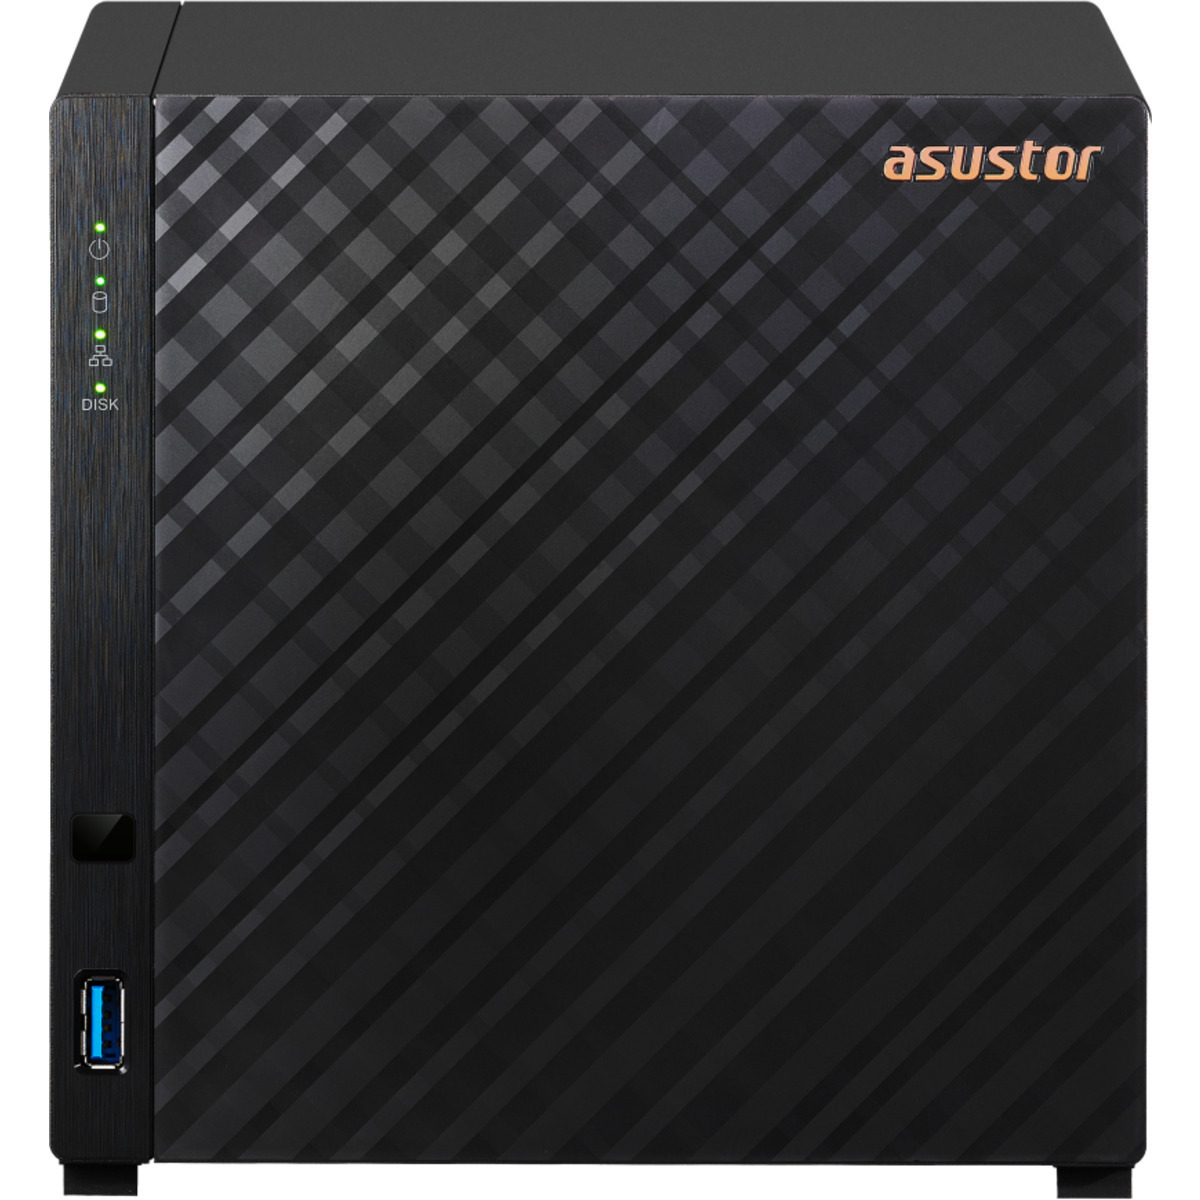 ASUSTOR DRIVESTOR 4 AS1104T 88tb 4-Bay Desktop Personal / Basic Home / Small Office NAS - Network Attached Storage Device 4x22tb Western Digital Ultrastar HC580 SED WUH722422ALE6L1 3.5 7200rpm SATA 6Gb/s HDD ENTERPRISE Class Drives Installed - Burn-In Tested DRIVESTOR 4 AS1104T